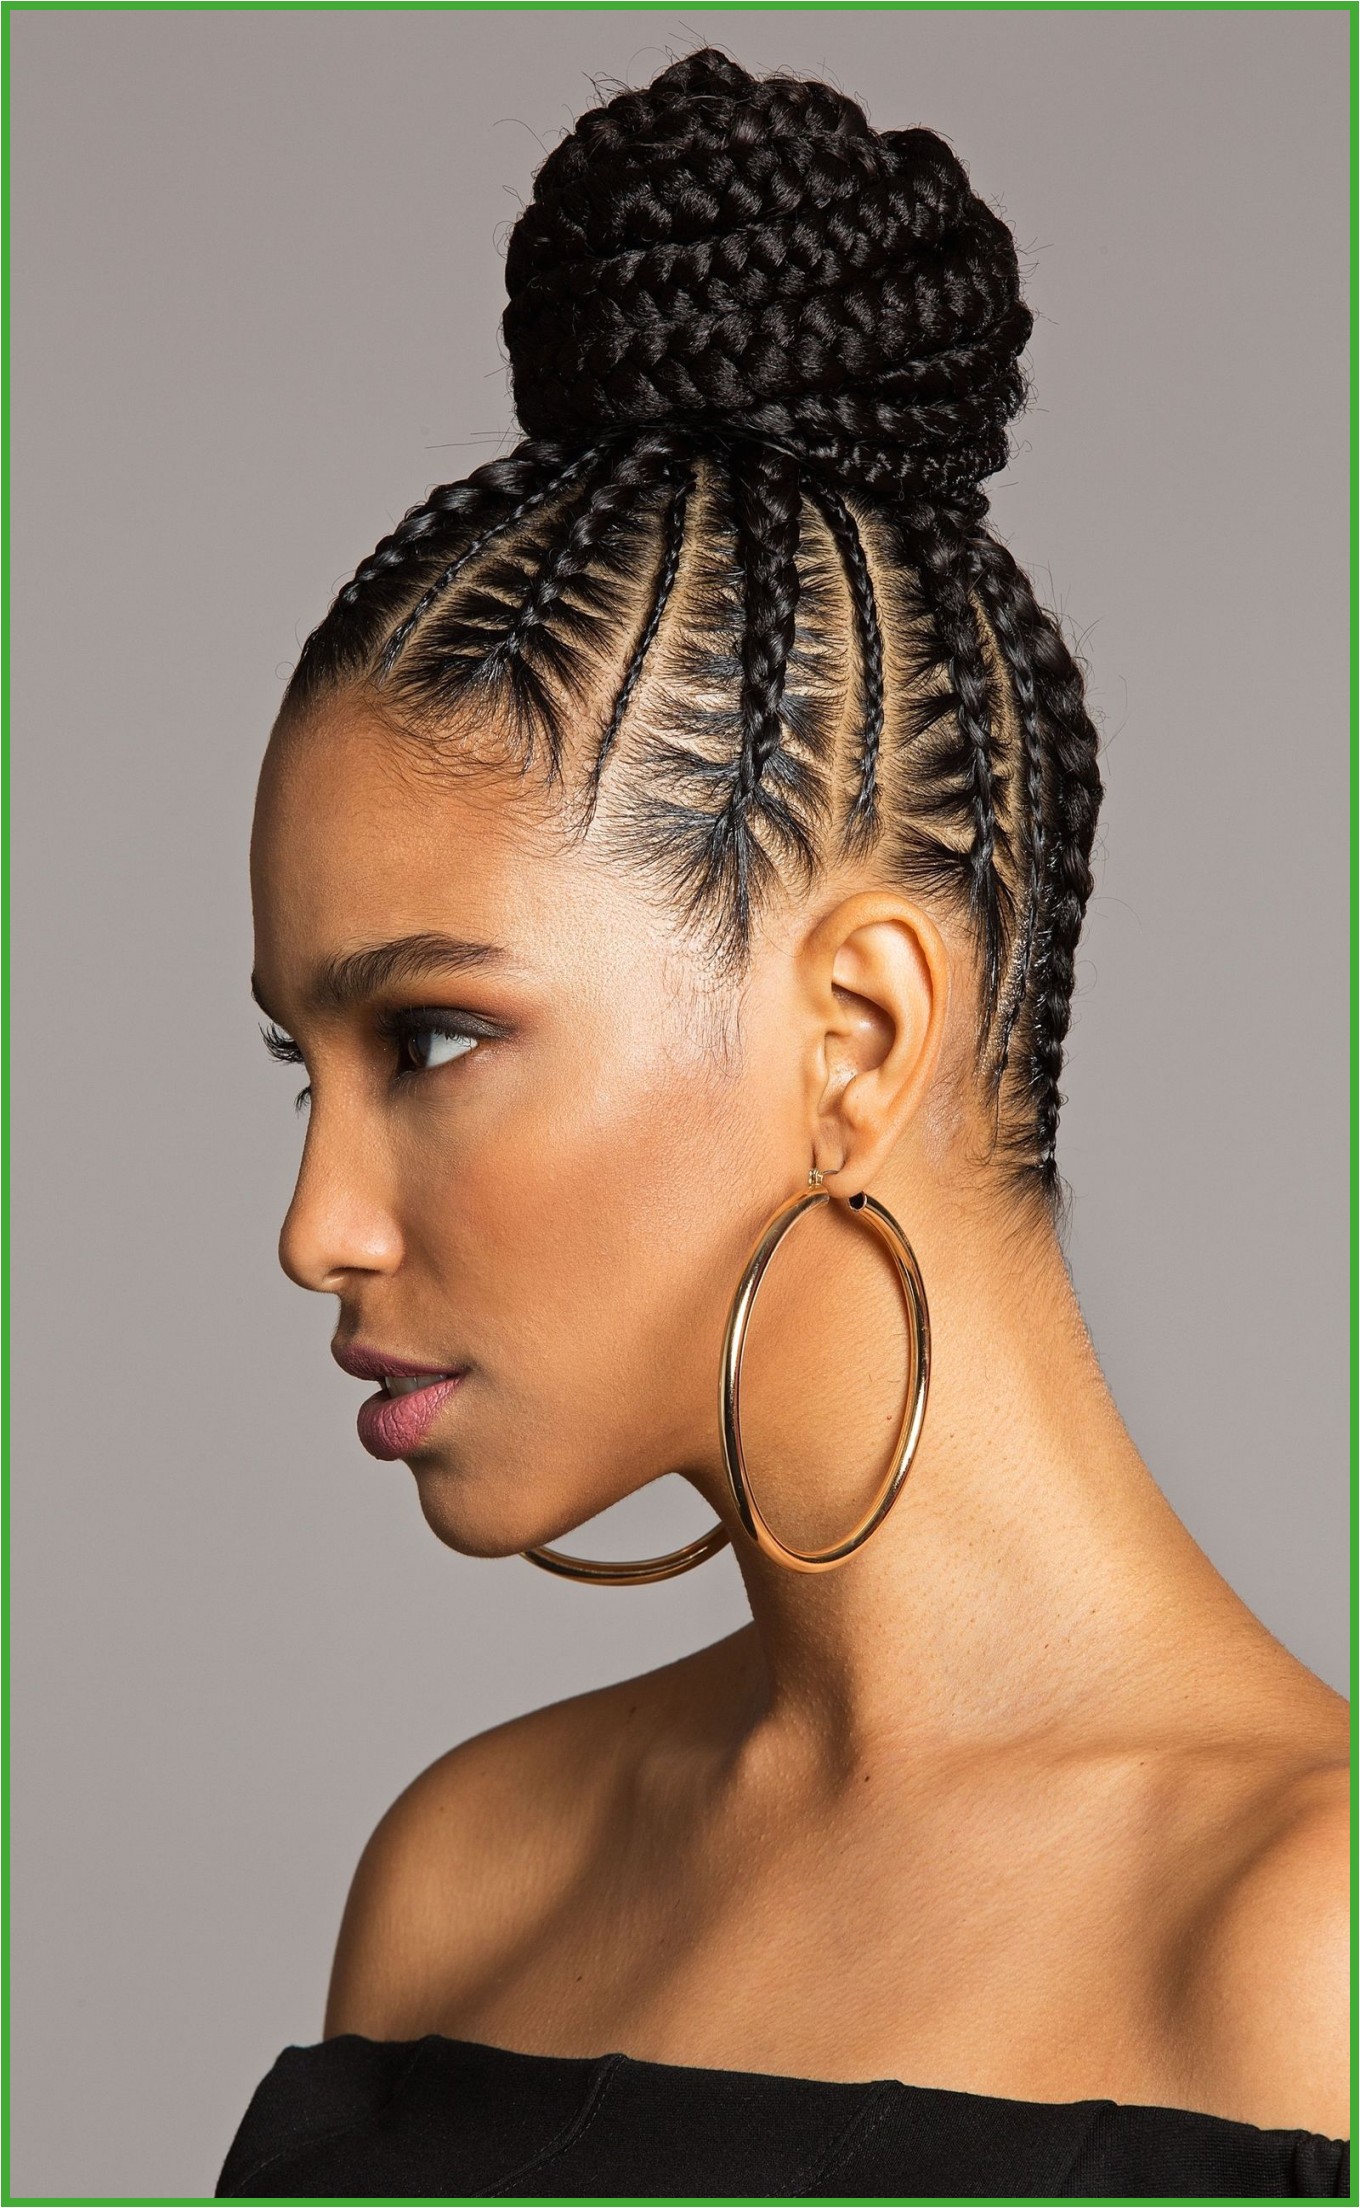 Quick Braid Styles You Re Going to Want to Wear This Bomb Braided Bun All Summer